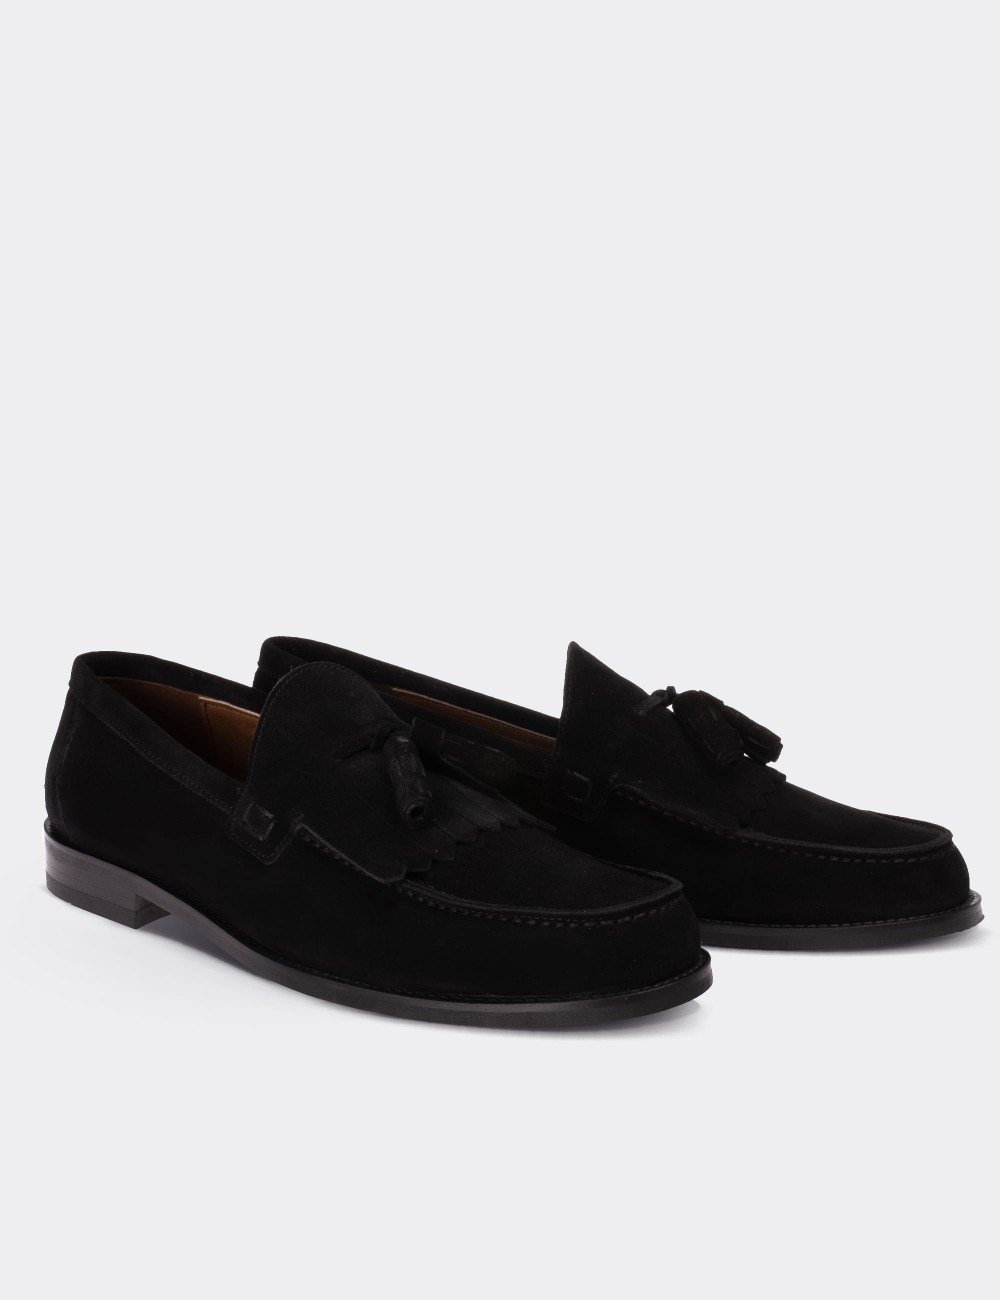 Black Suede Leather Loafers 01735MSYHM02 - Deery